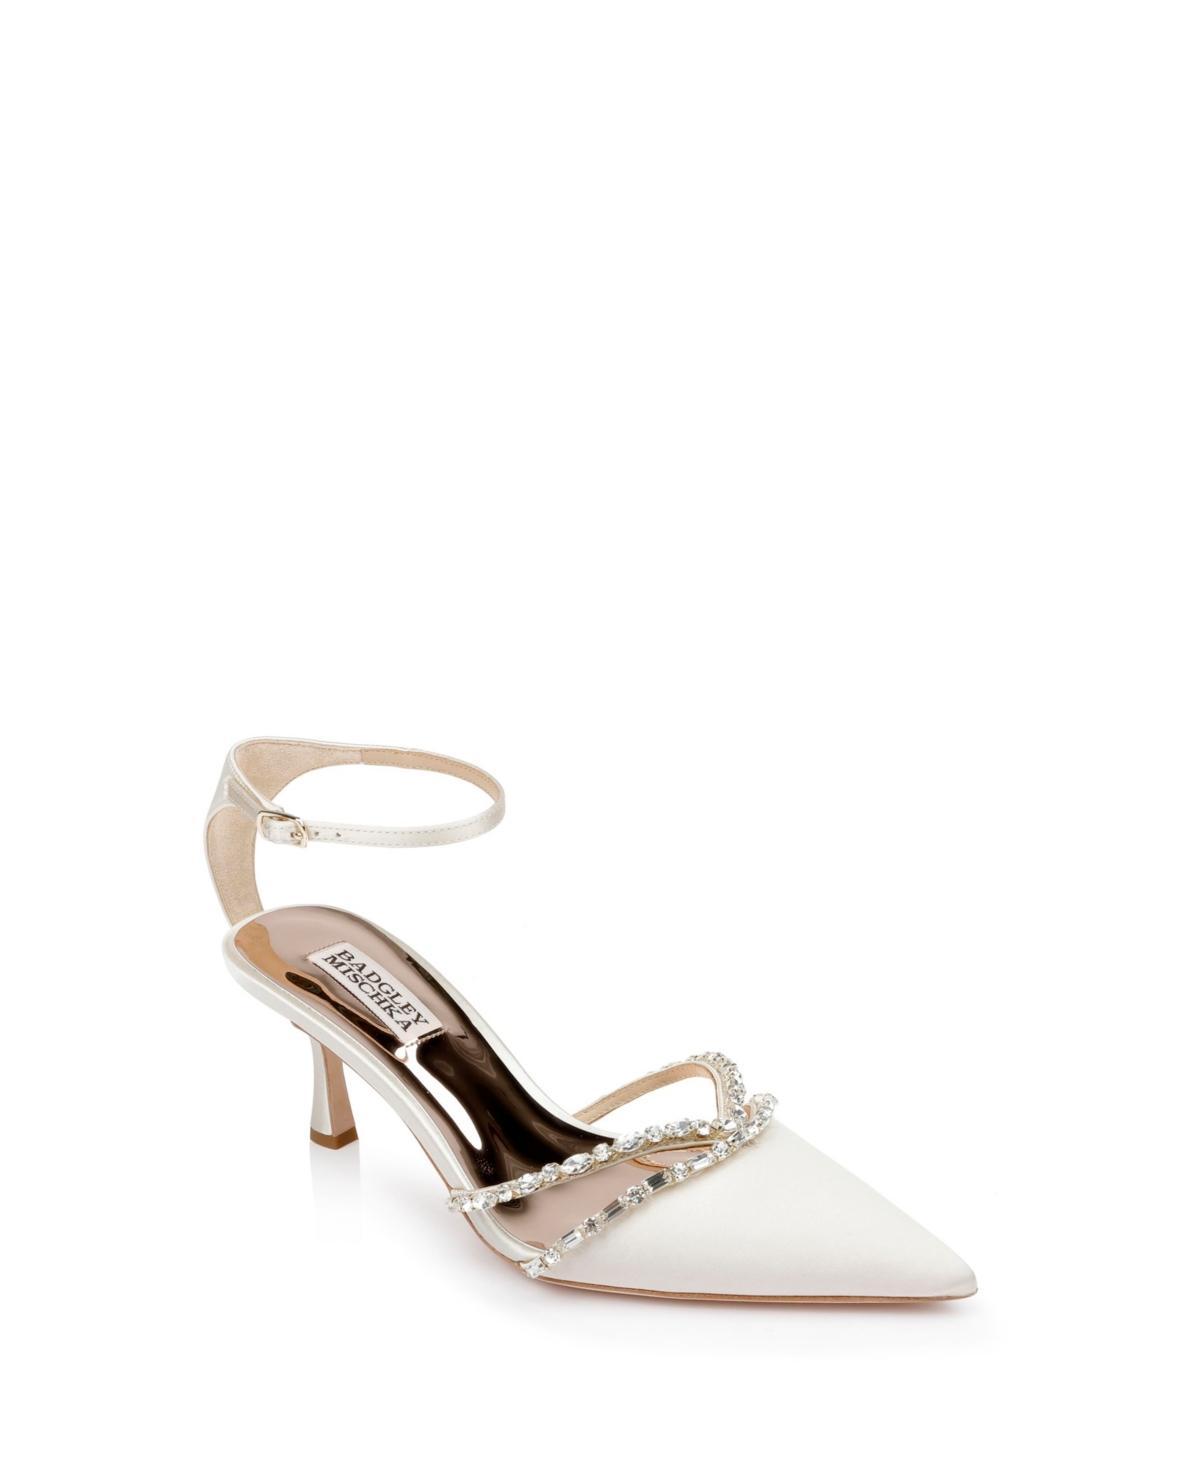 Badgley Mischka Collection Ankle Strap Pointed Toe Pump Product Image